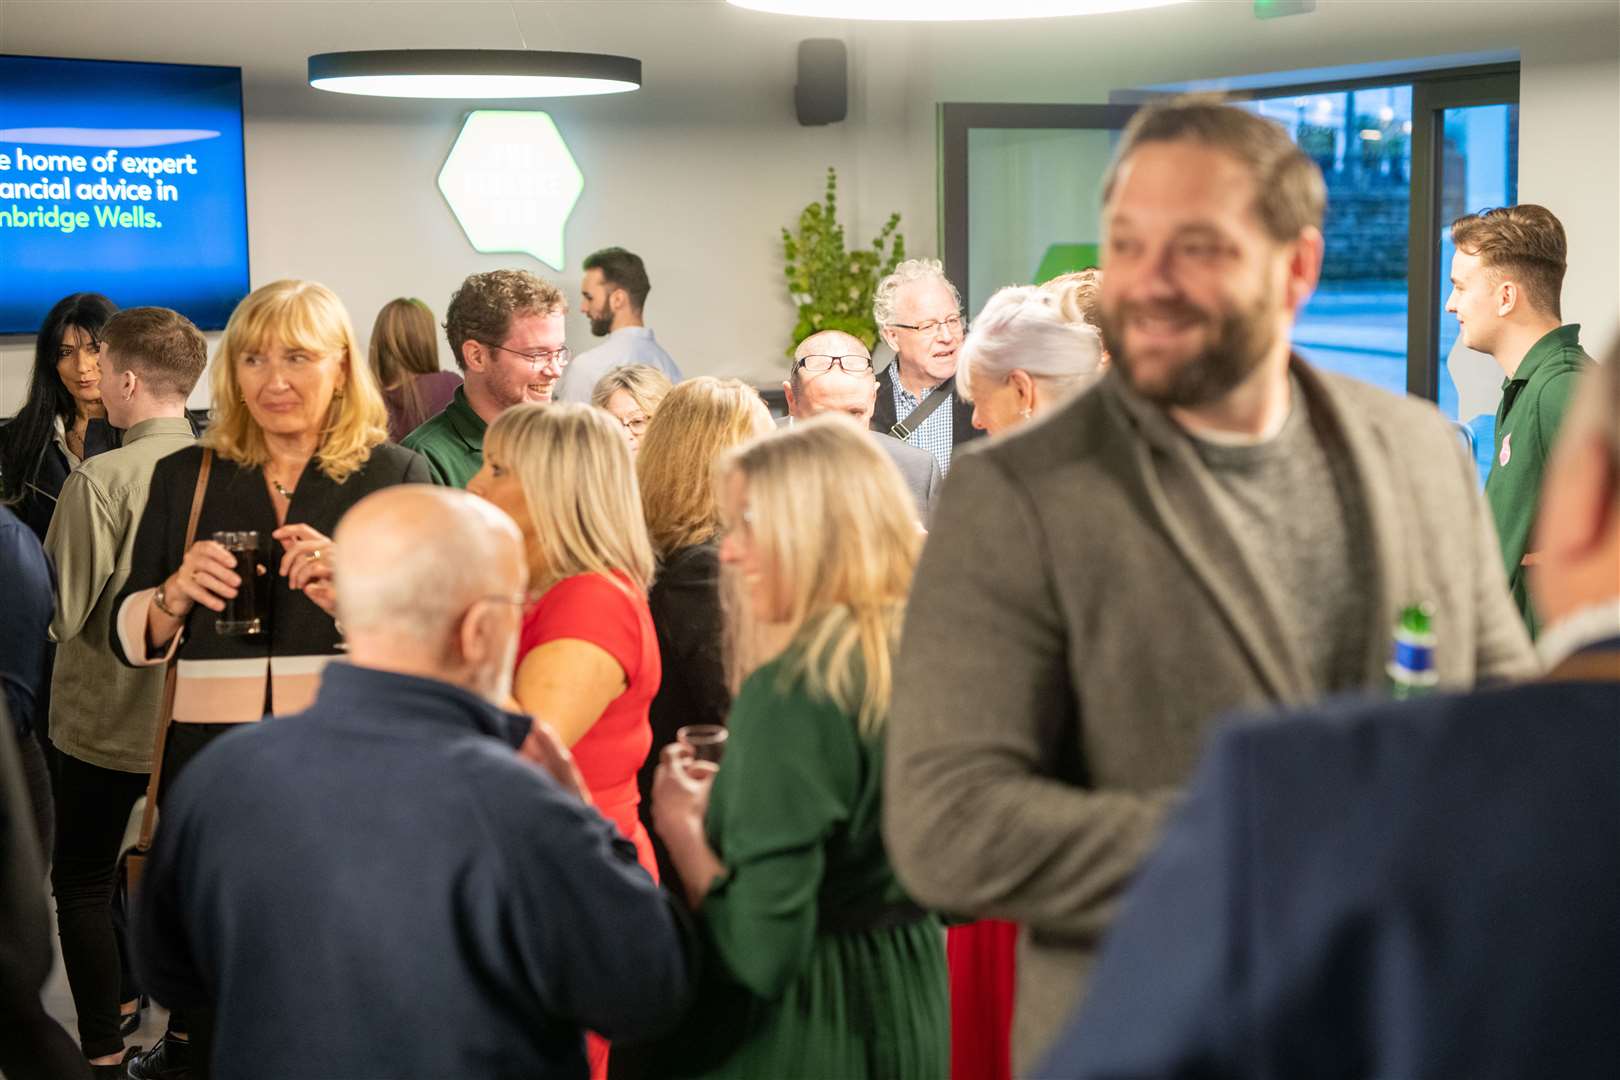 The Finance Hub launch event at its offices in Tunbridge Wells last month